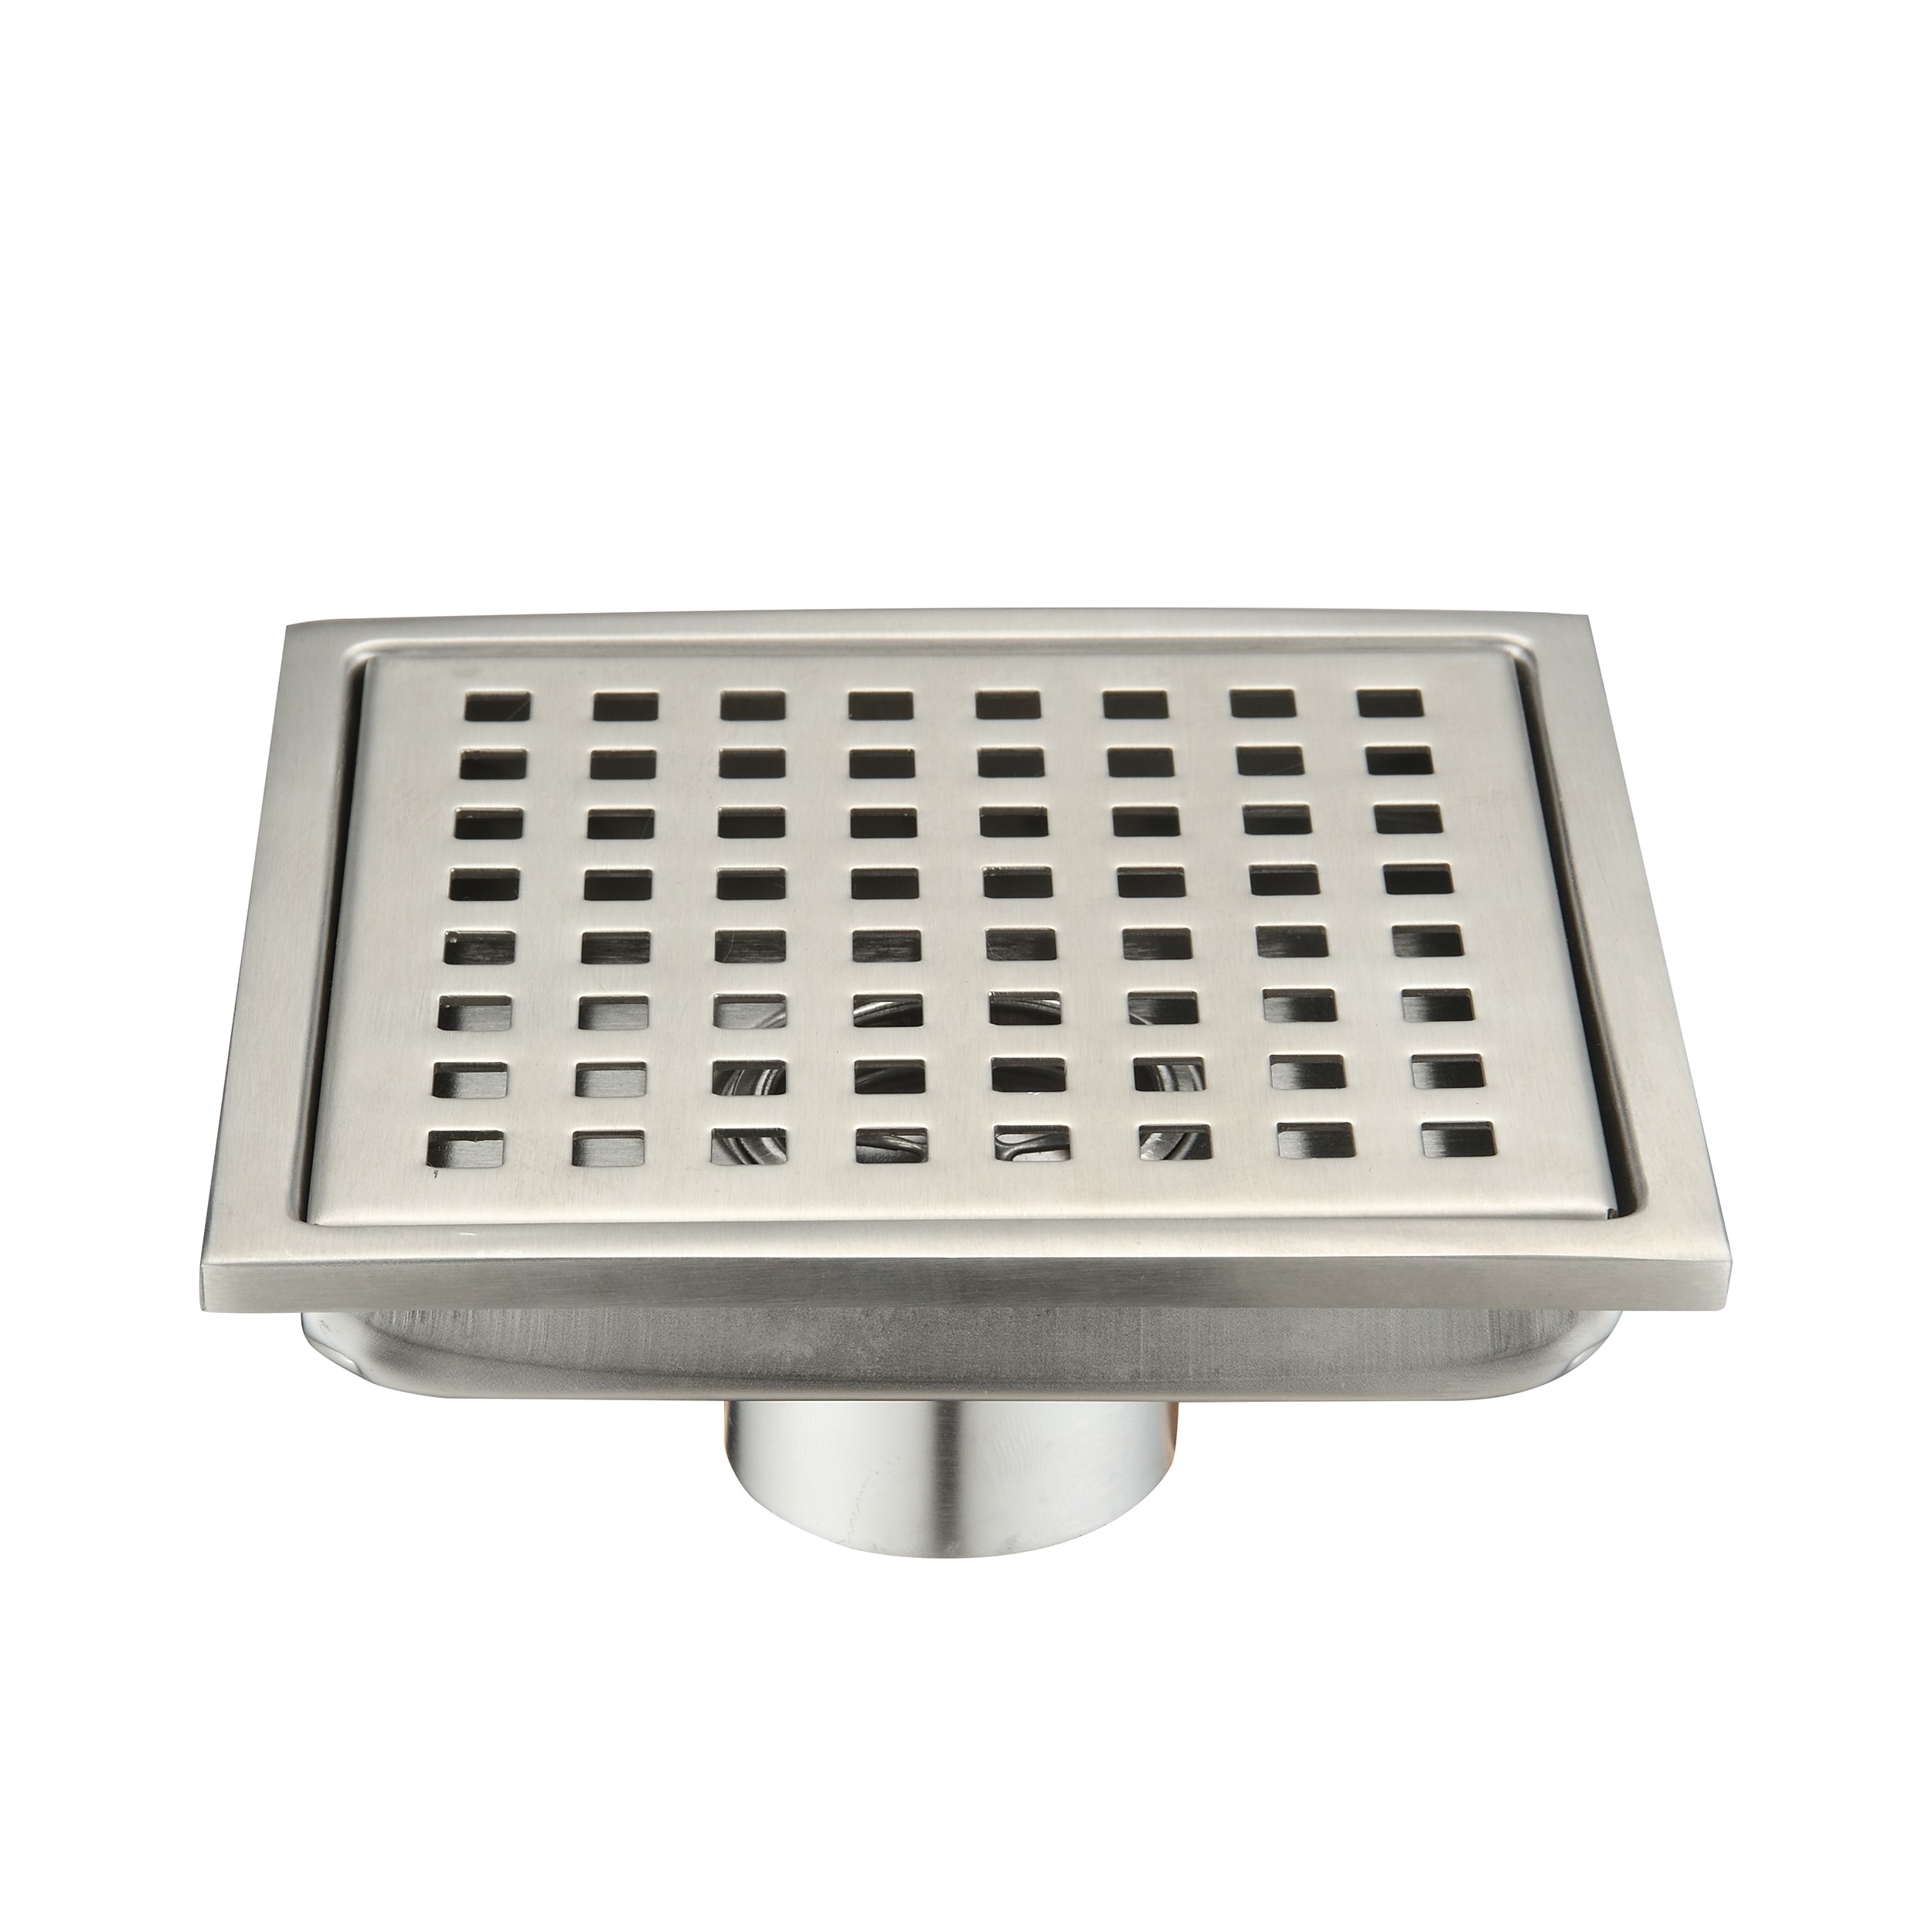 Shower Drain Cover (4-1/4 in Round) Replacement |Custom Drip Drain Grate |  Shower Base Strainer Grid (Matte Black)